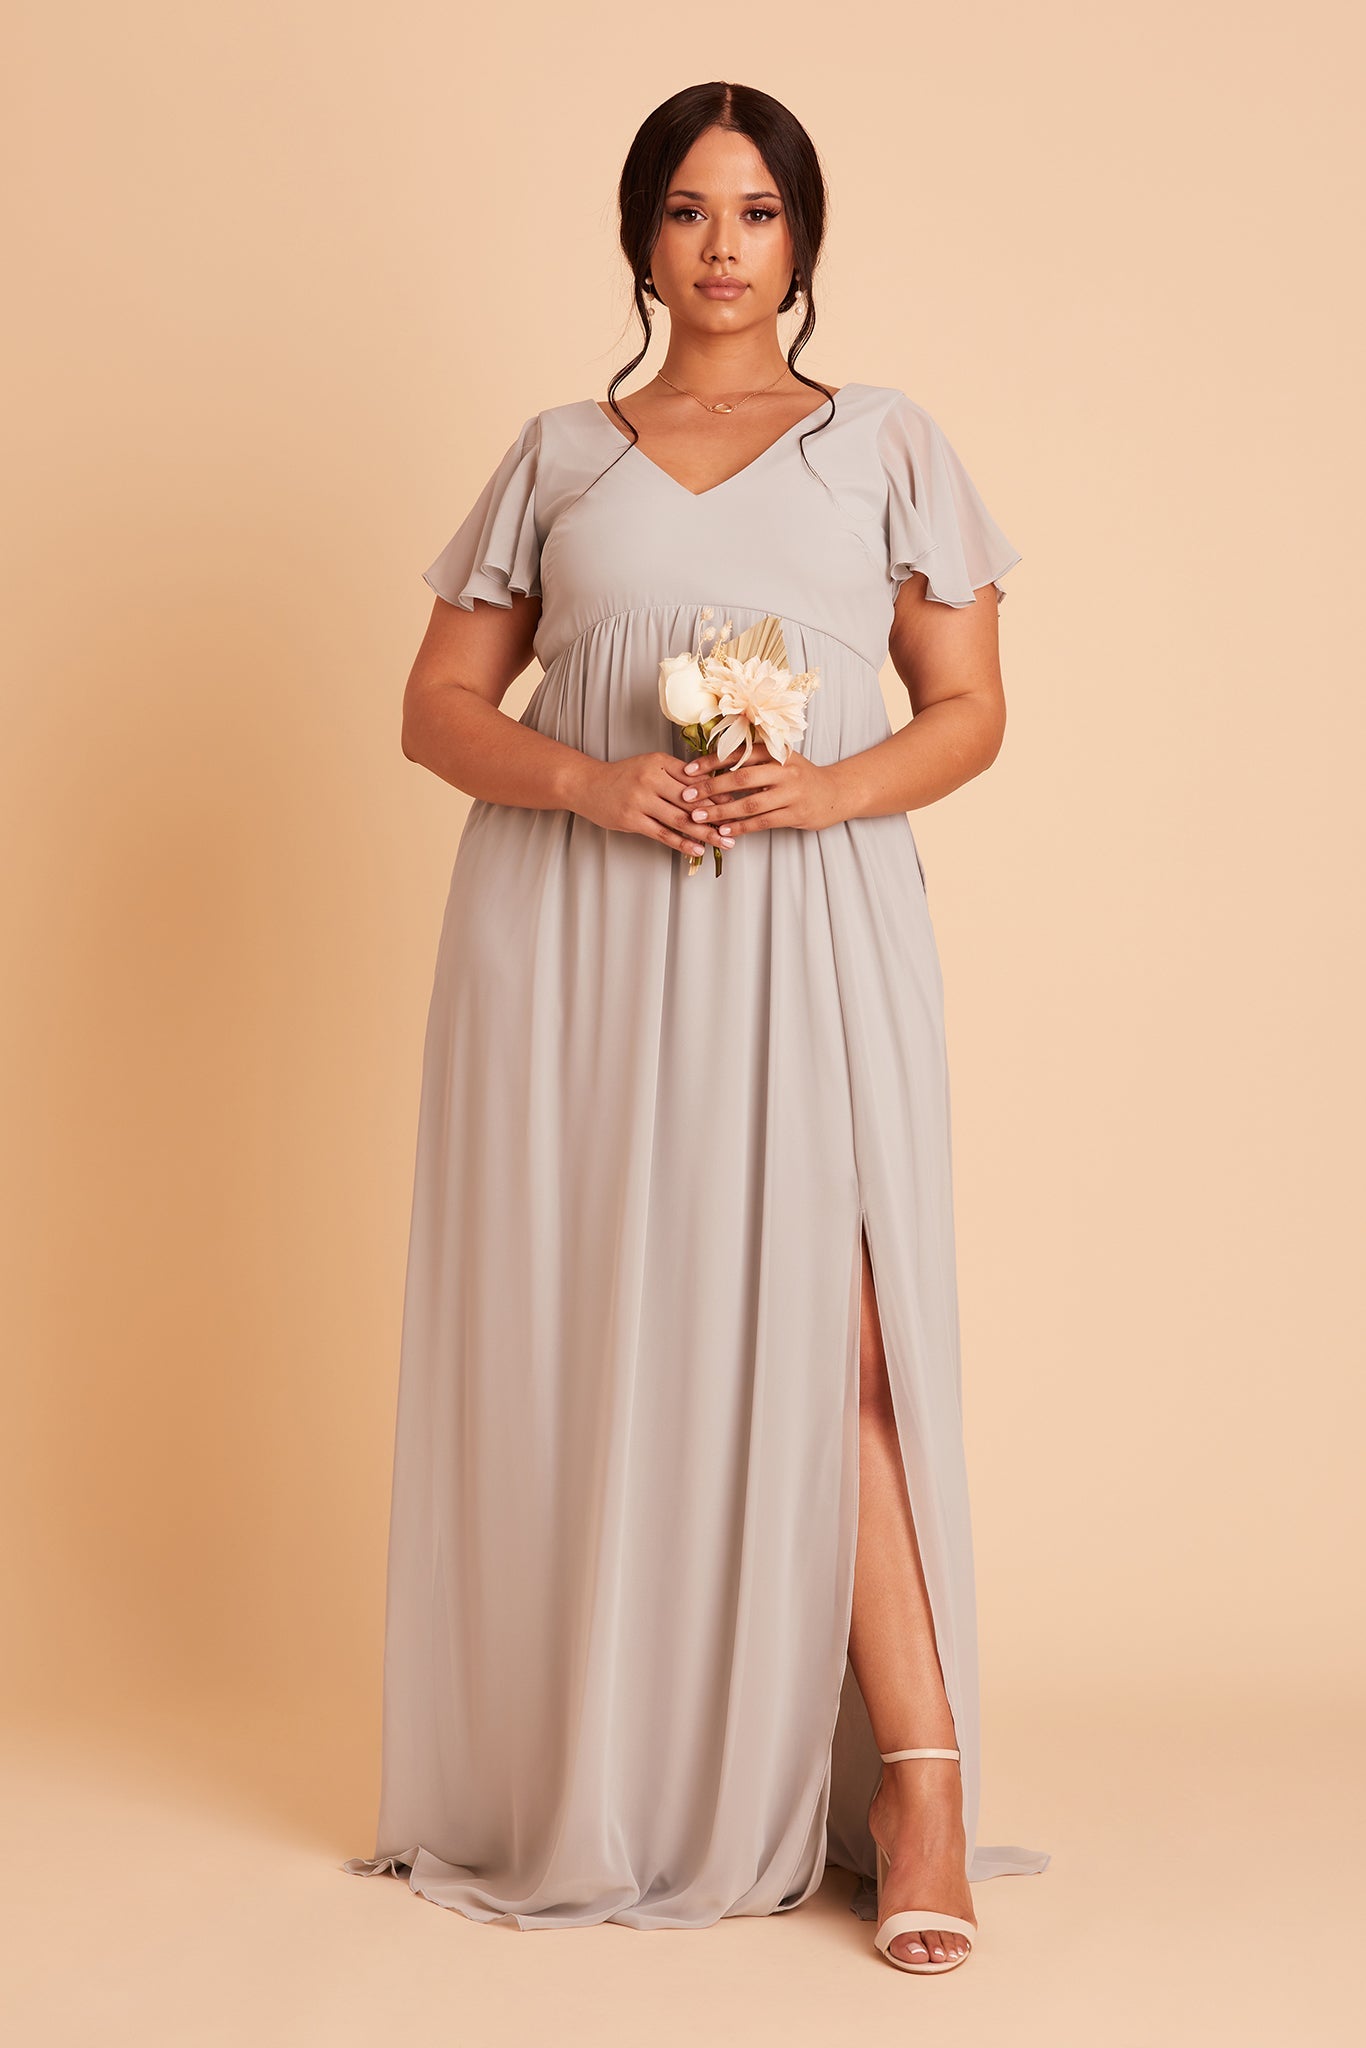 Hannah empire plus size bridesmaid dress in dove gray chiffon by Birdy Grey, front view